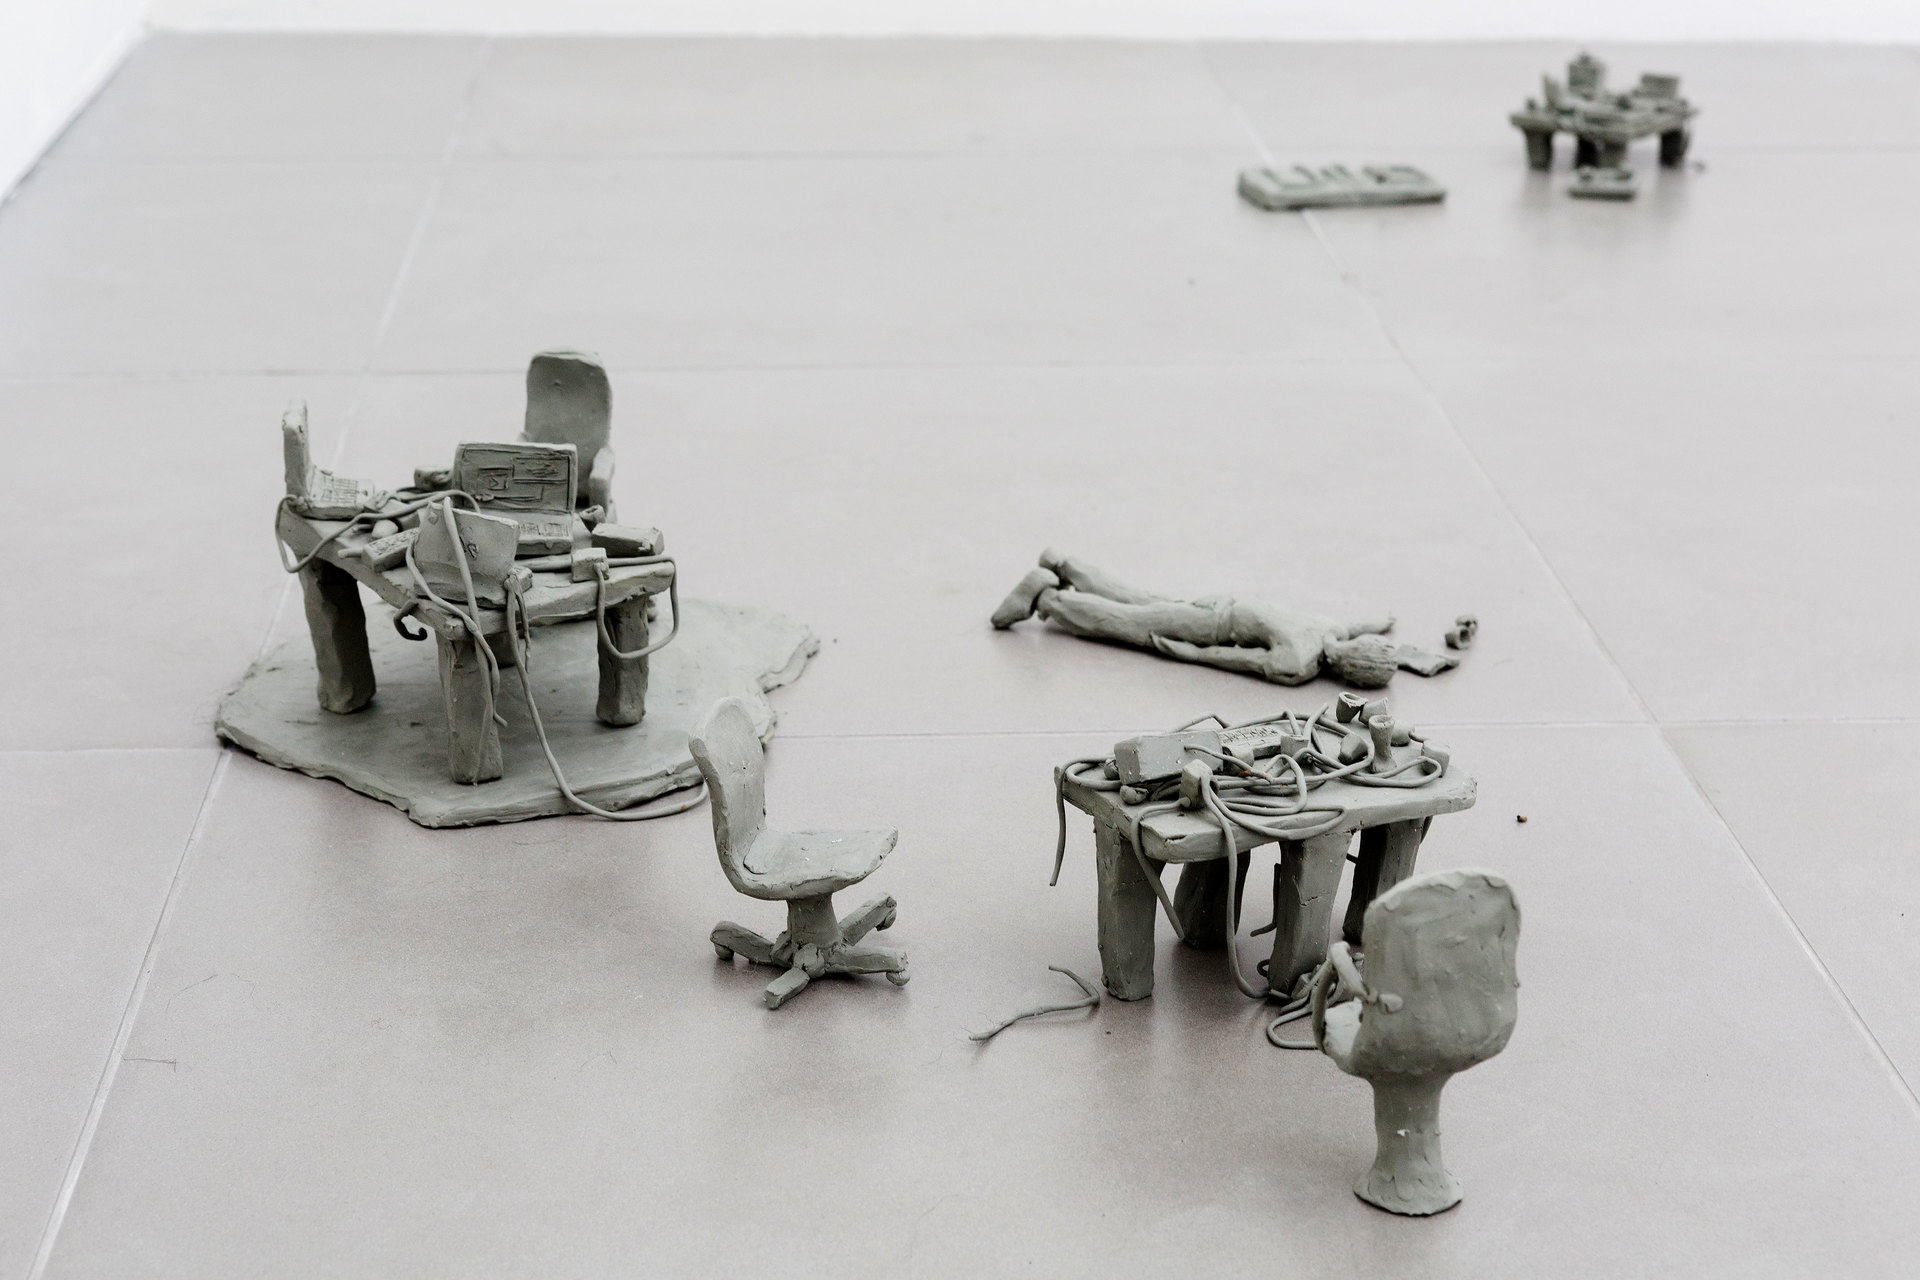 Mélanie Matranga, handmade situation, 2015, Non drying Paste, dimensions variable, Cell Project Space